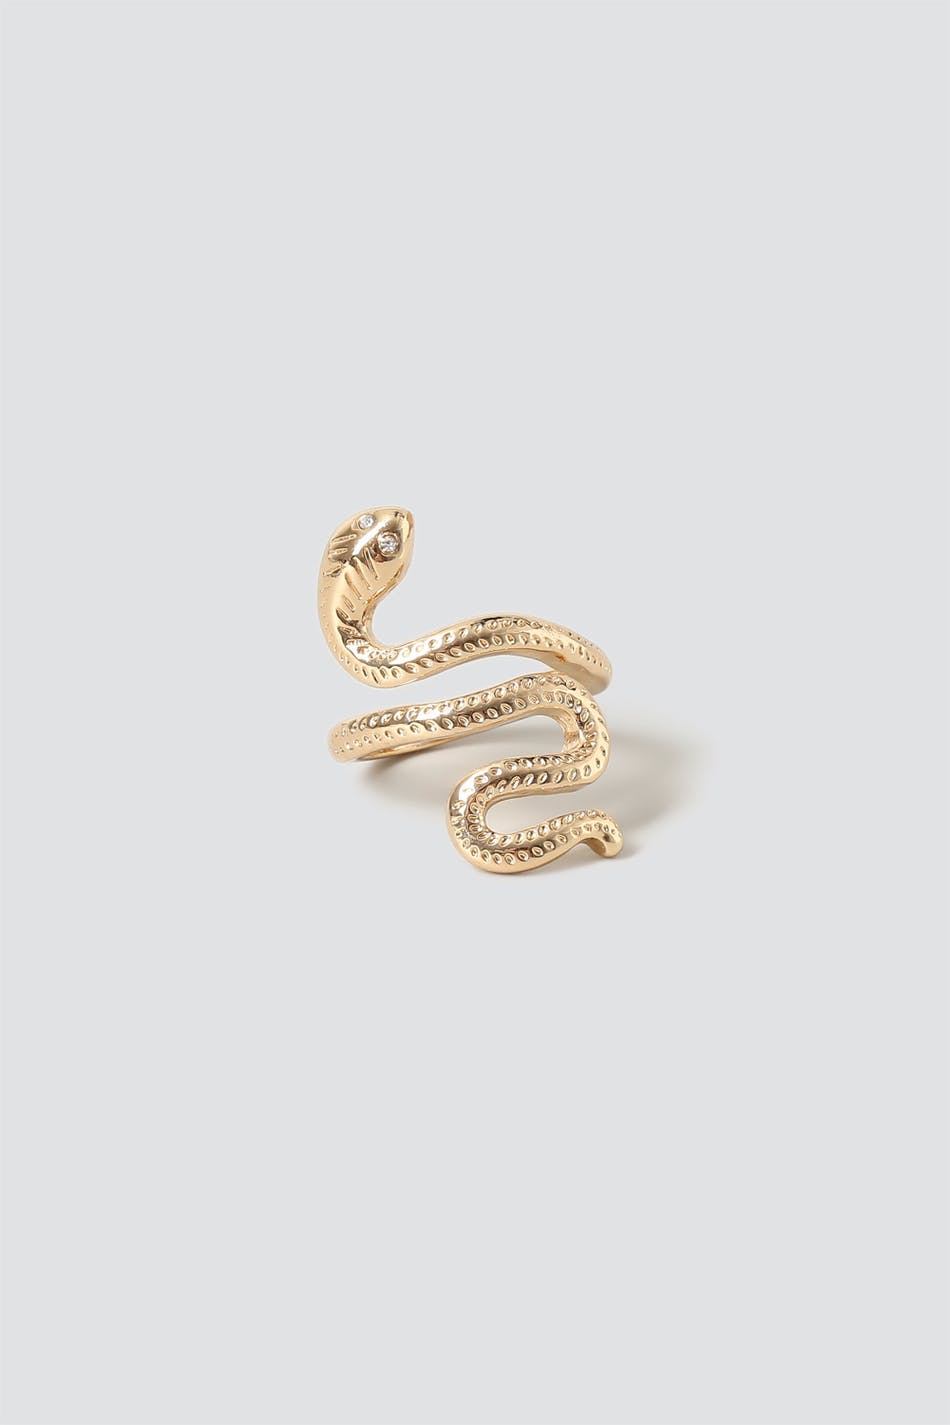 Gina Tricot Gold Twist Snake Ring one size  Gold